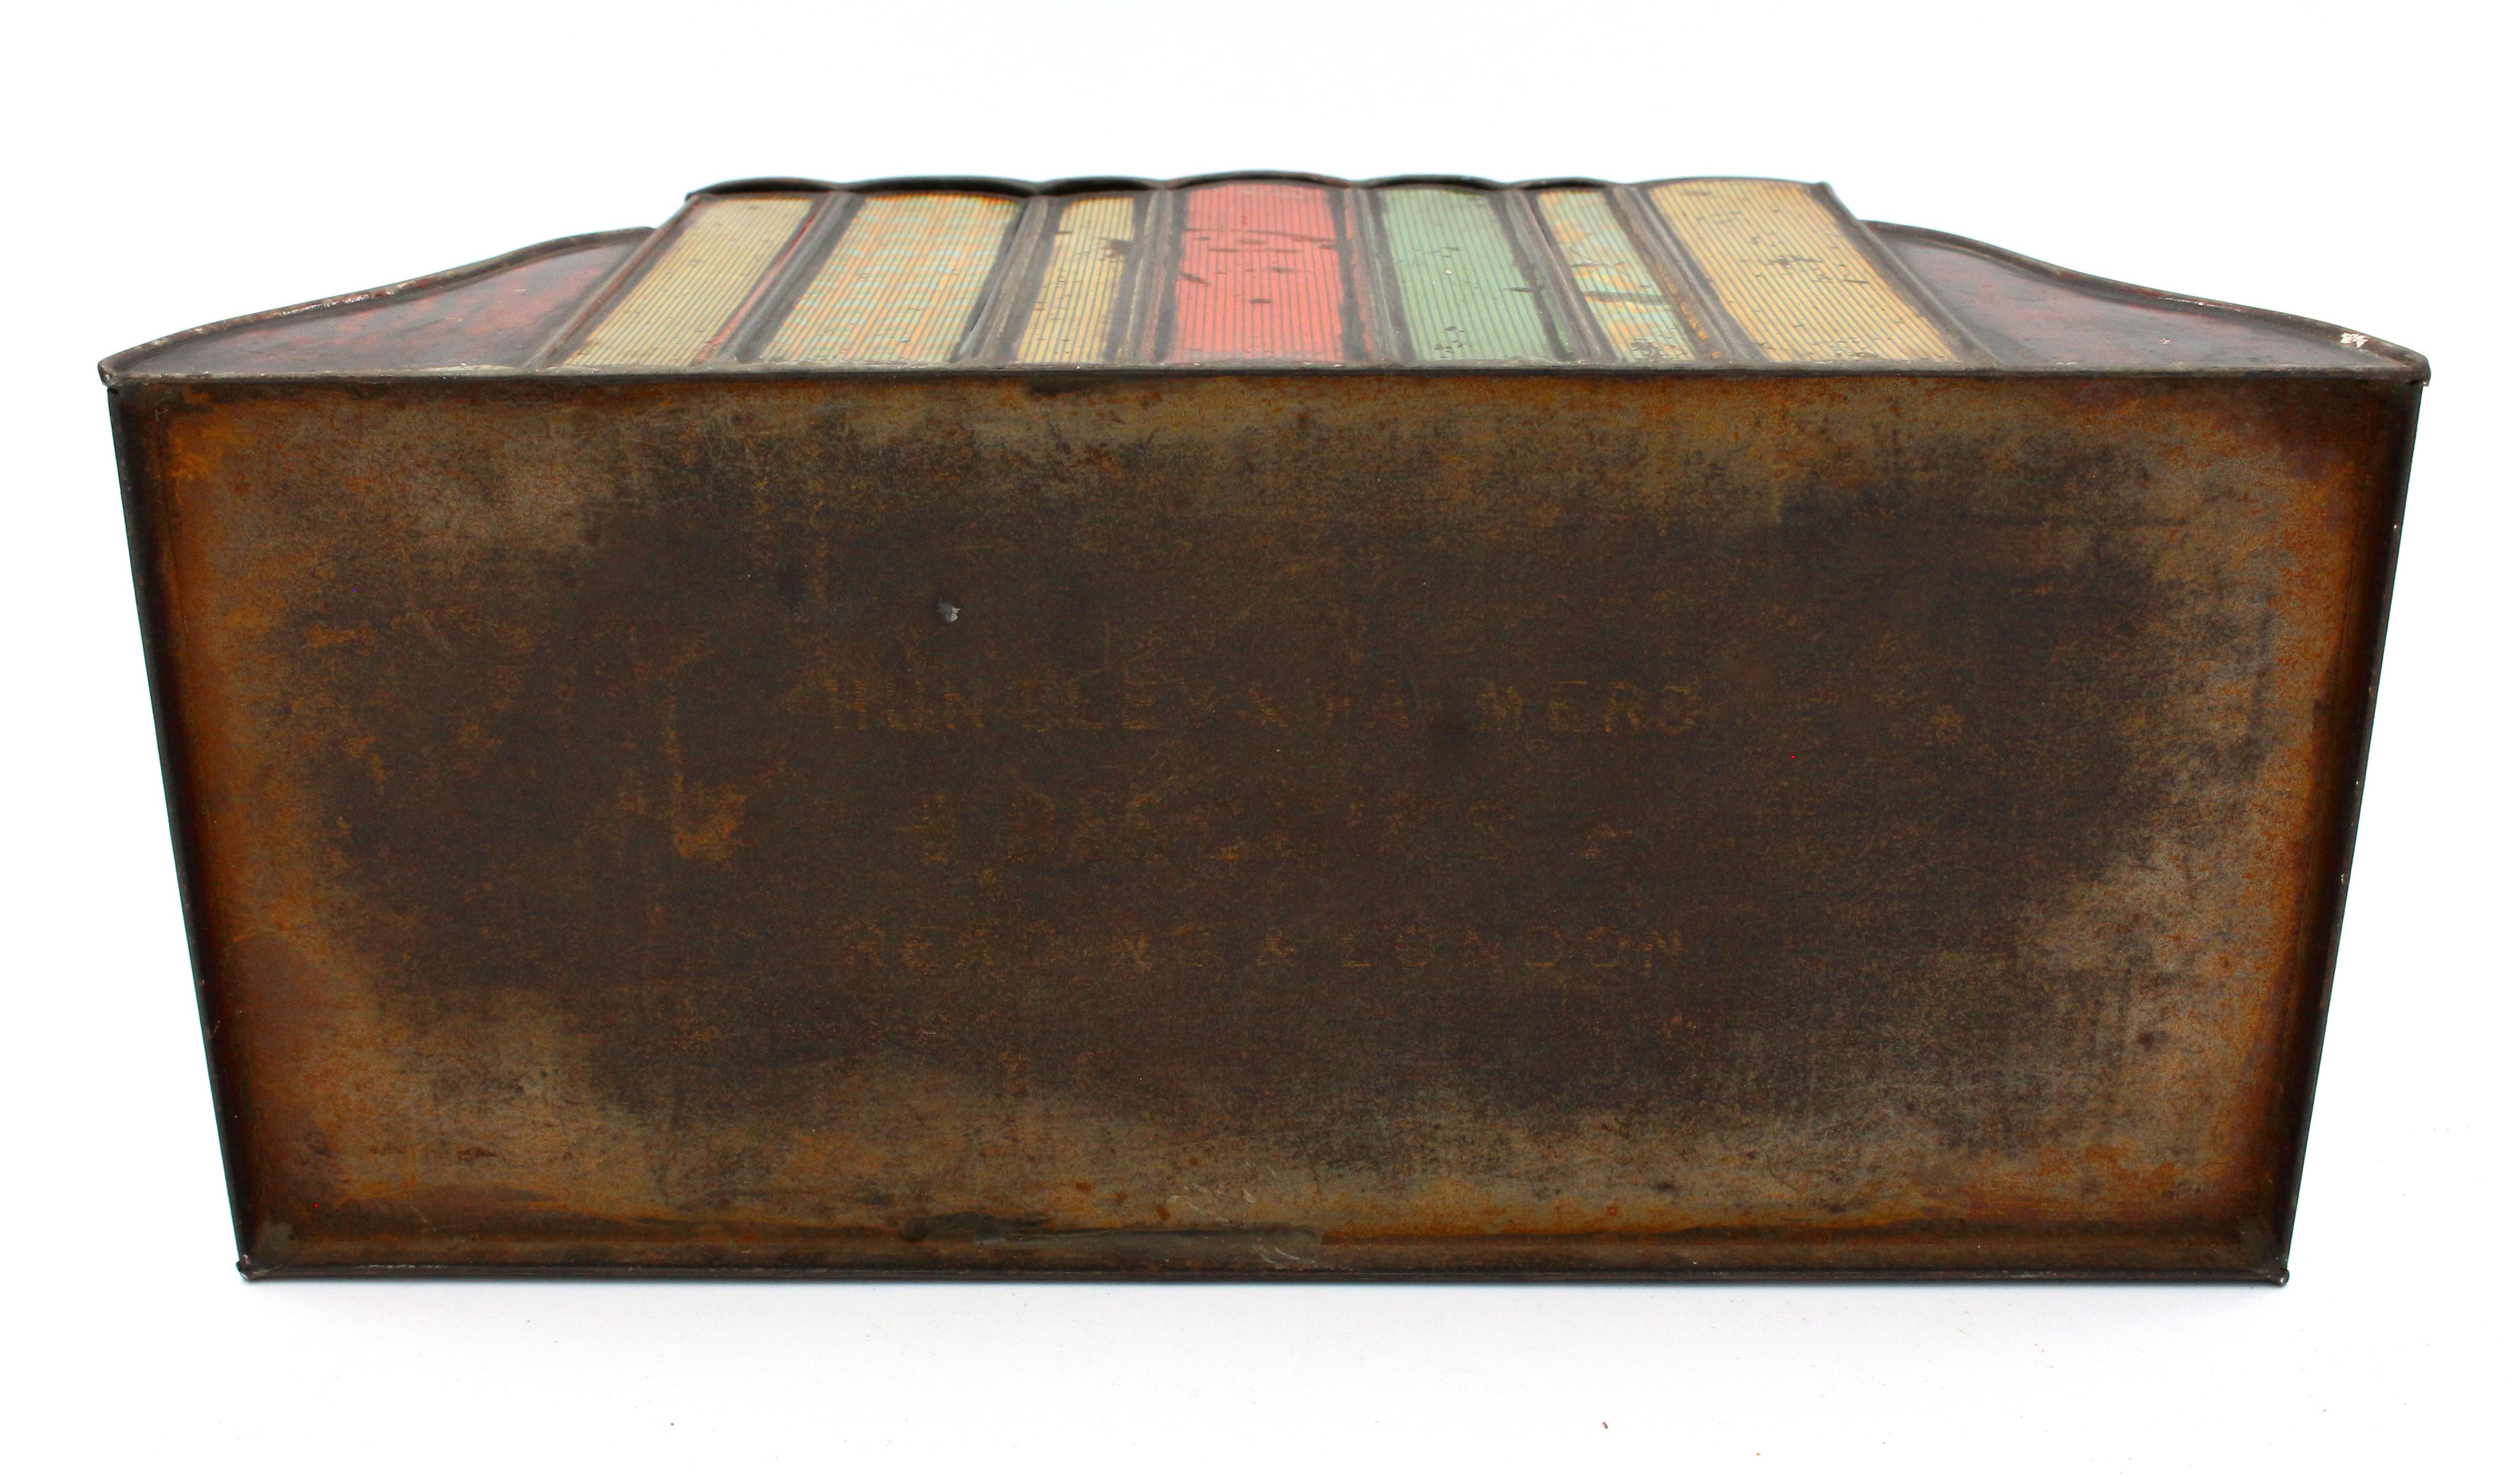 Early 20th Century Books & Bookend Form Biscuit Tin by Huntley & Palmers For Sale 2